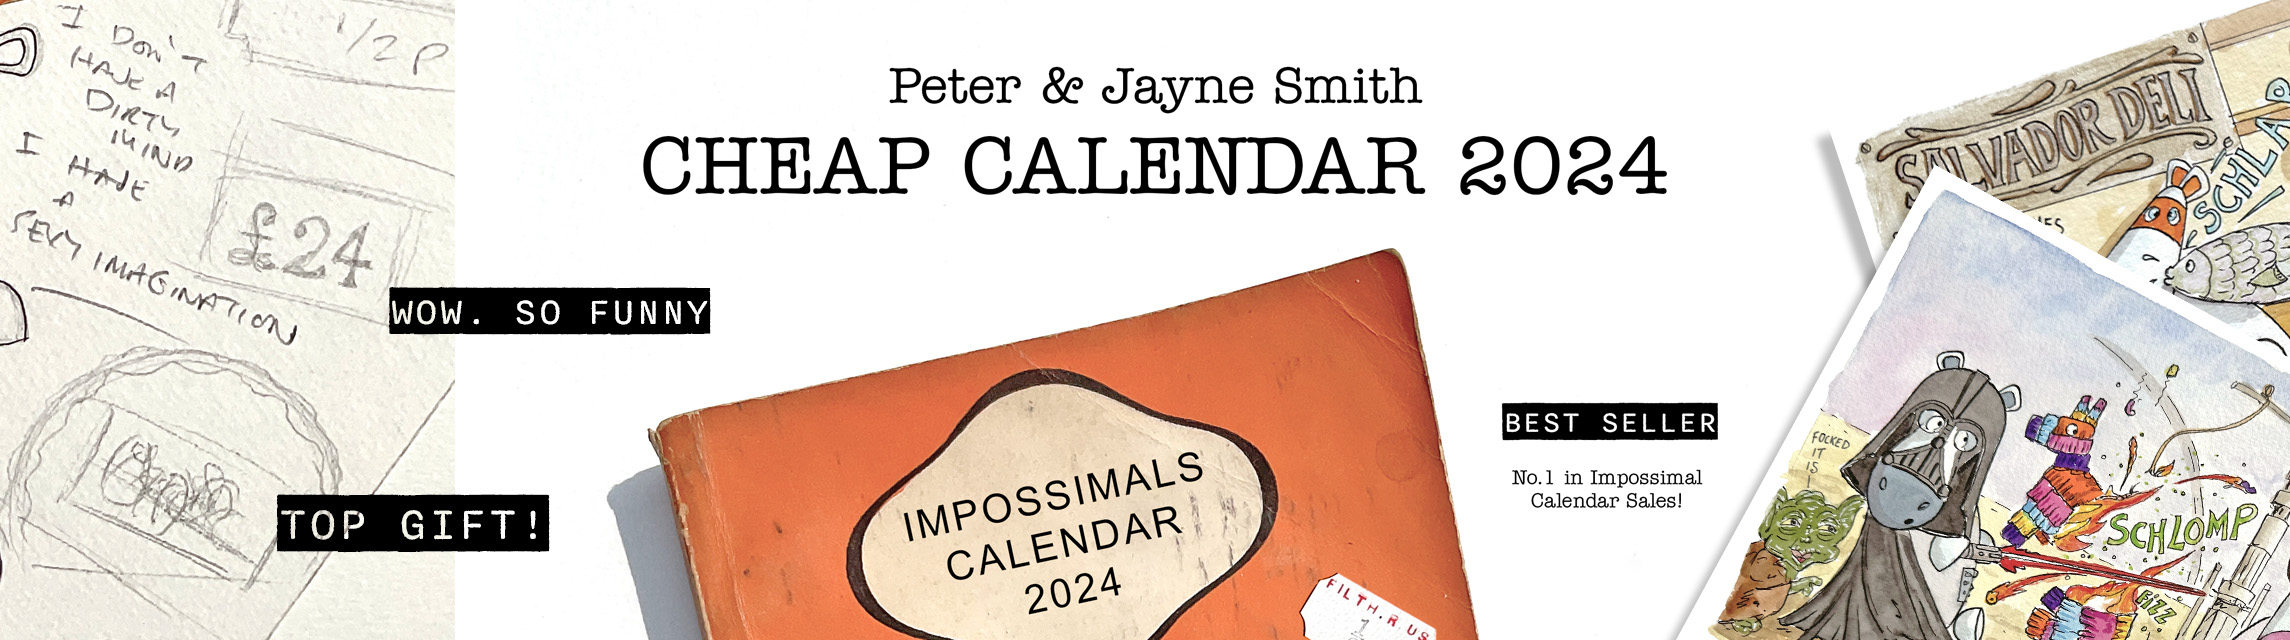 The latest and greatest Impossimal calendar!